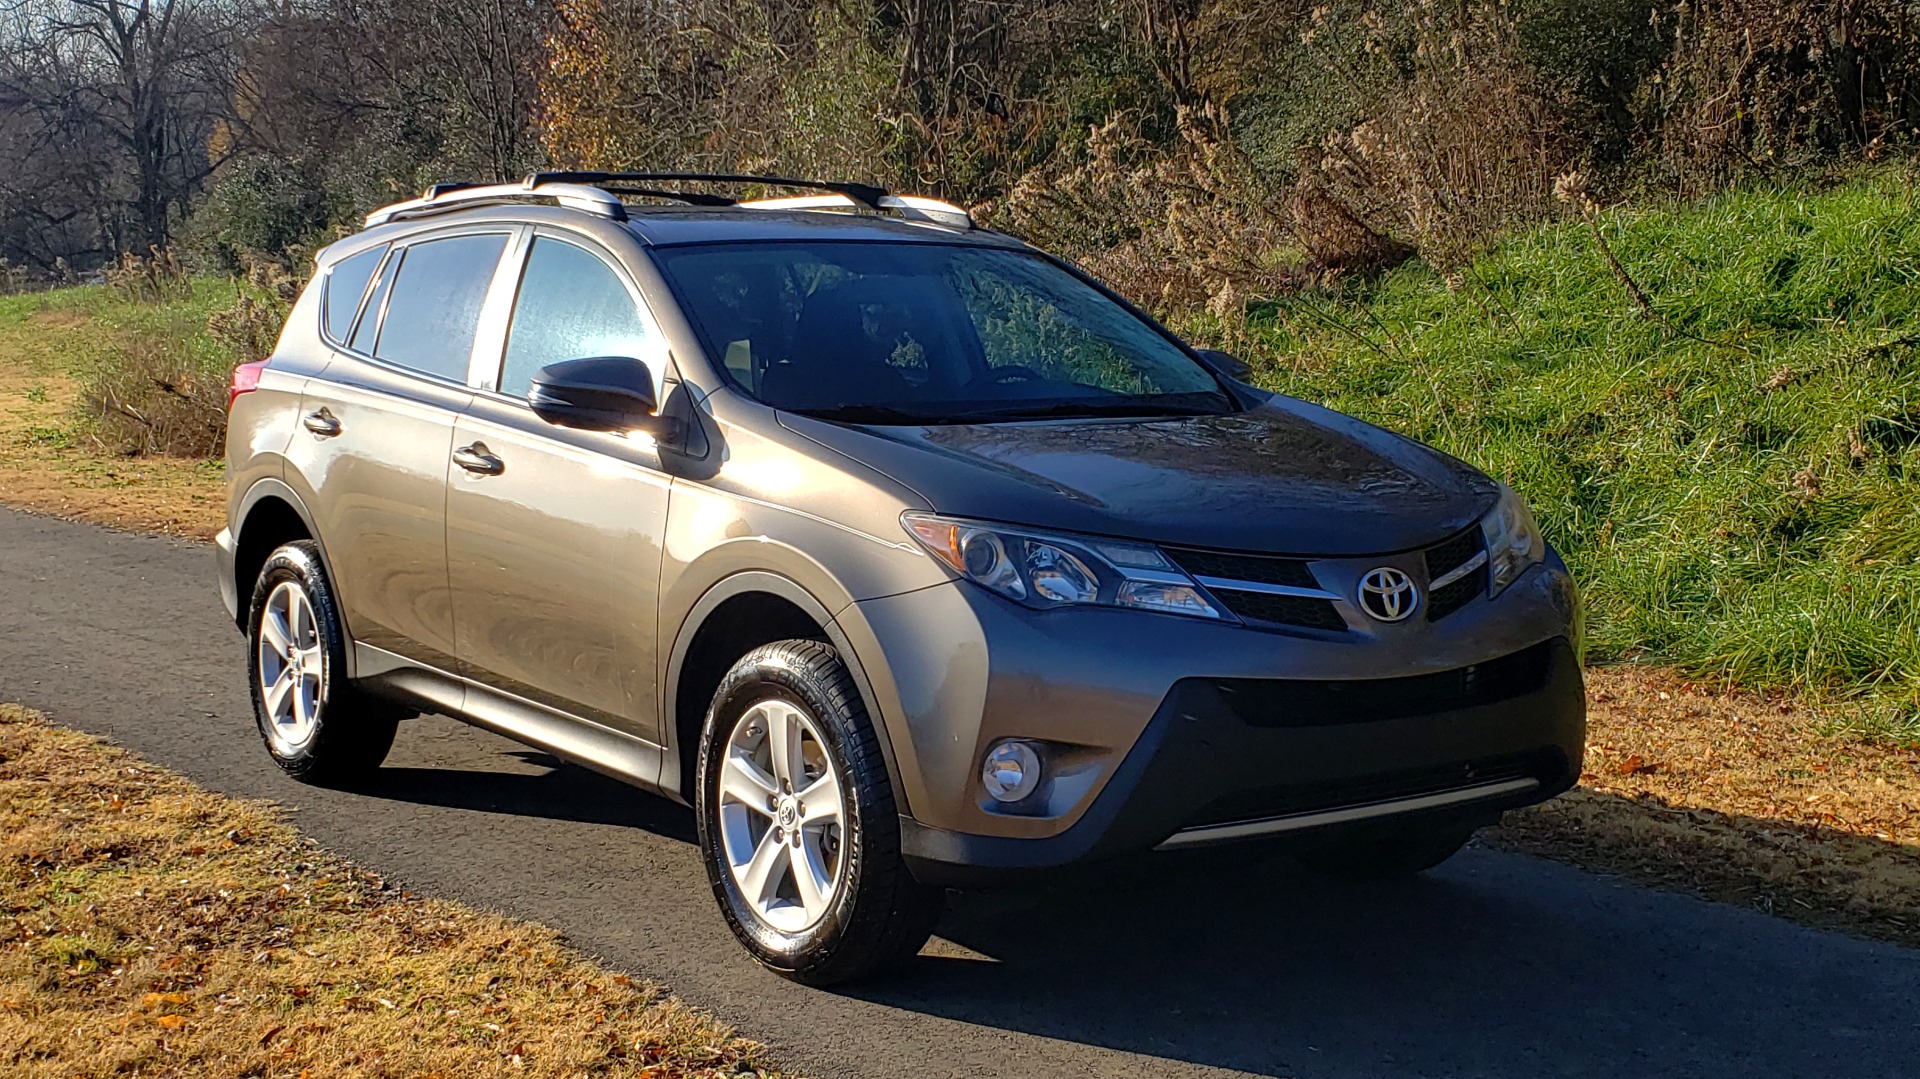 Used 2014 Toyota RAV4 XLE / FWD / 2.5L 4-CYL / 6-SPD AUTO / 17IN ALLOY / REARVIEW for sale Sold at Formula Imports in Charlotte NC 28227 5